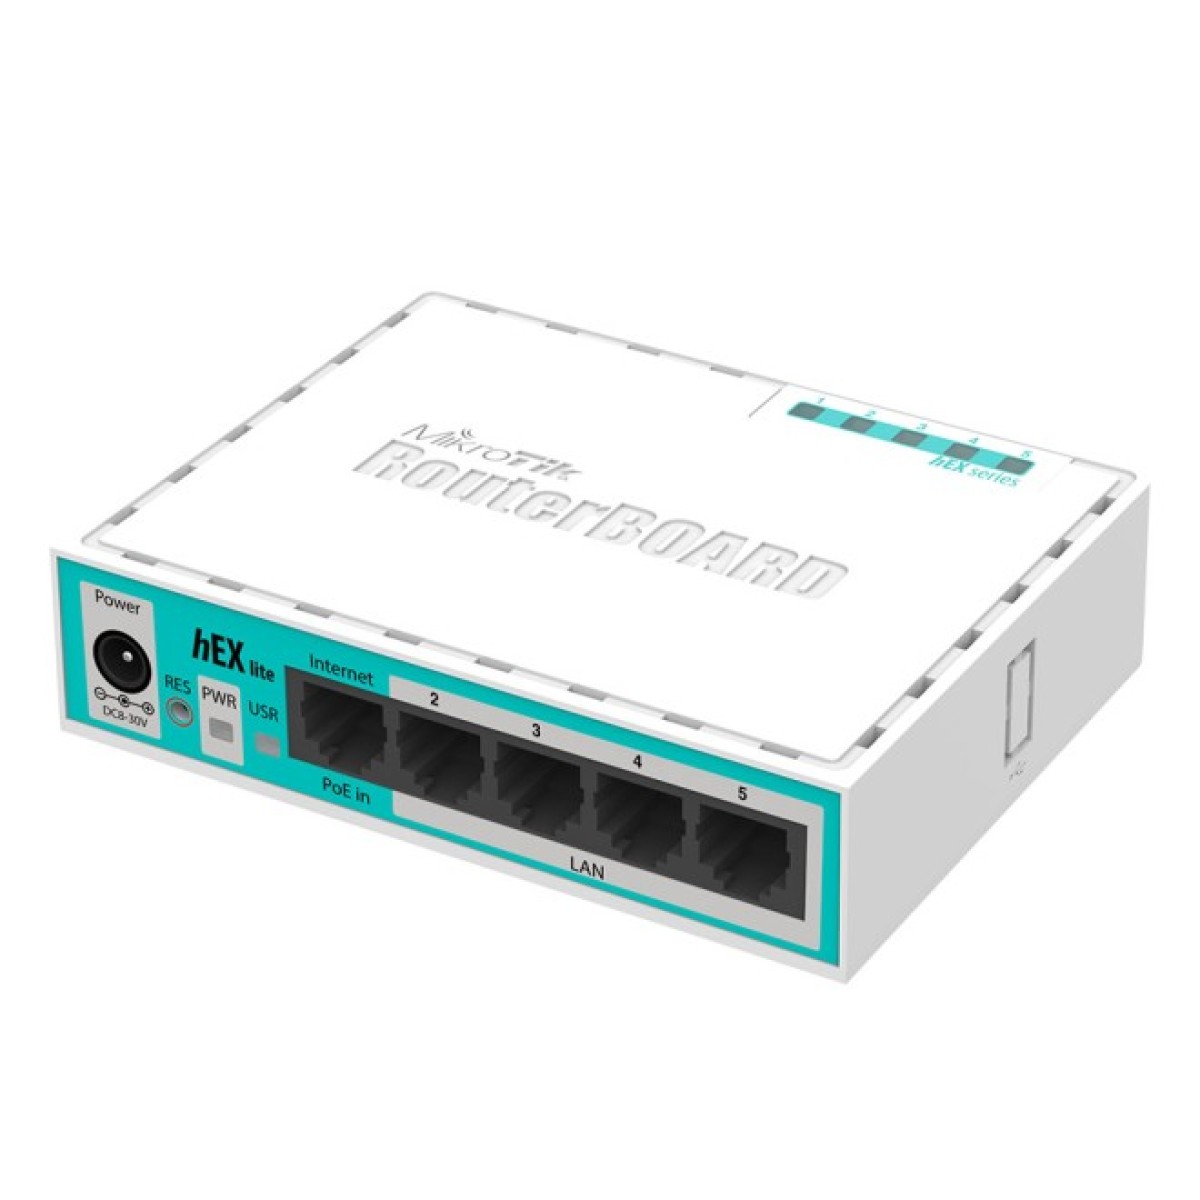 Маршрутизатор MIKROTIK RouterBOARD RB750r2 hEX lite 98_98.jpg - фото 1